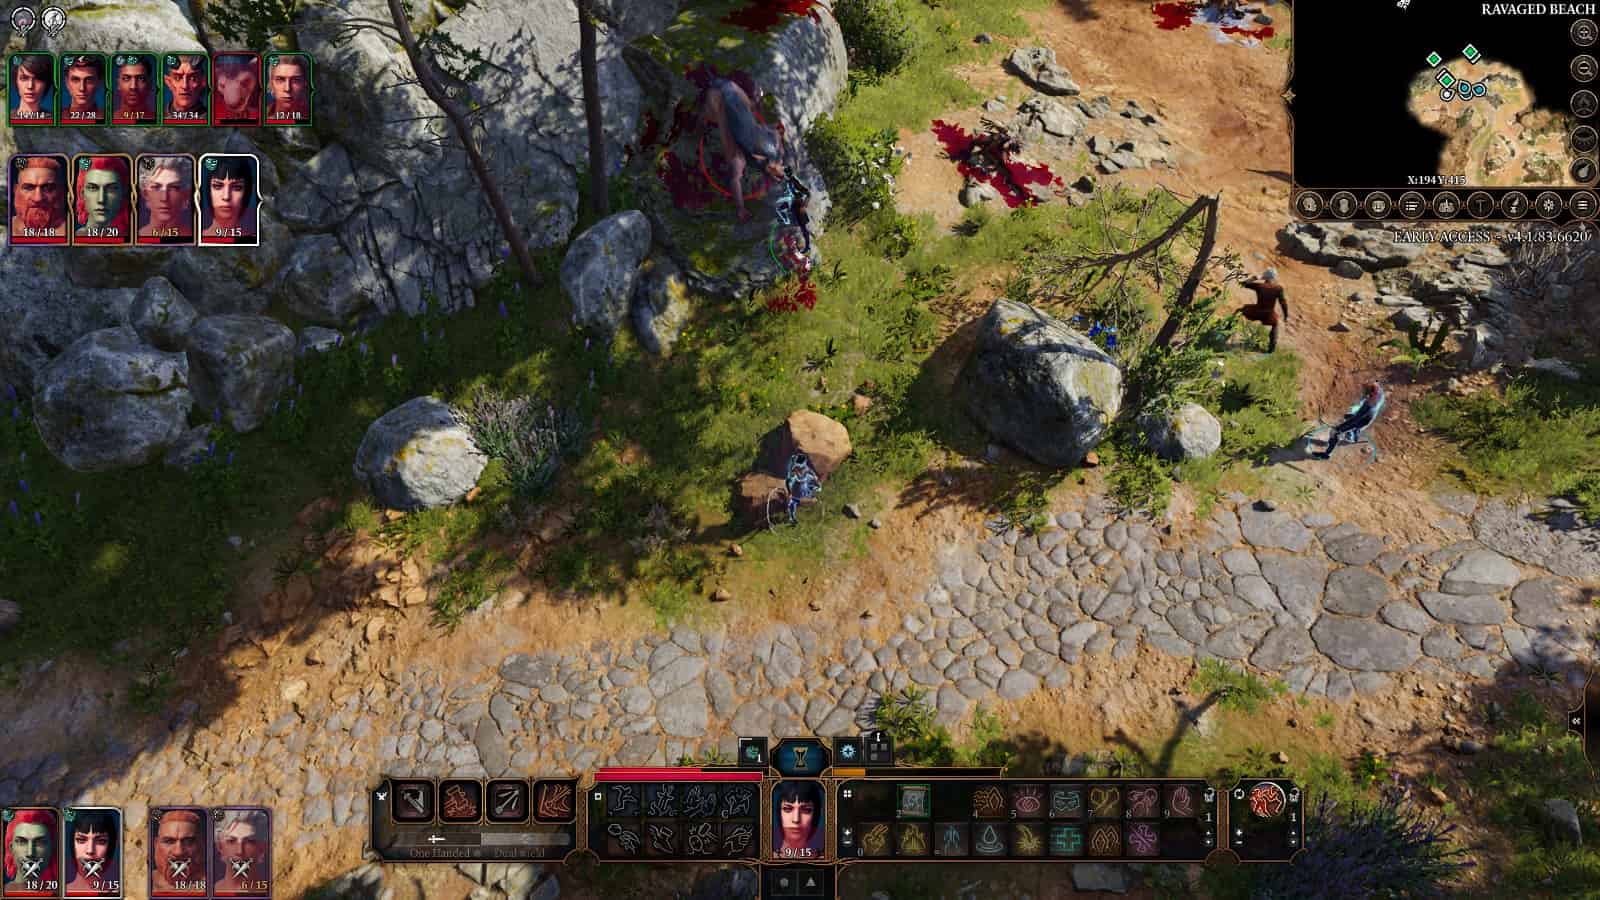 Baldur's Gate 3 review: a whole world of possibilities